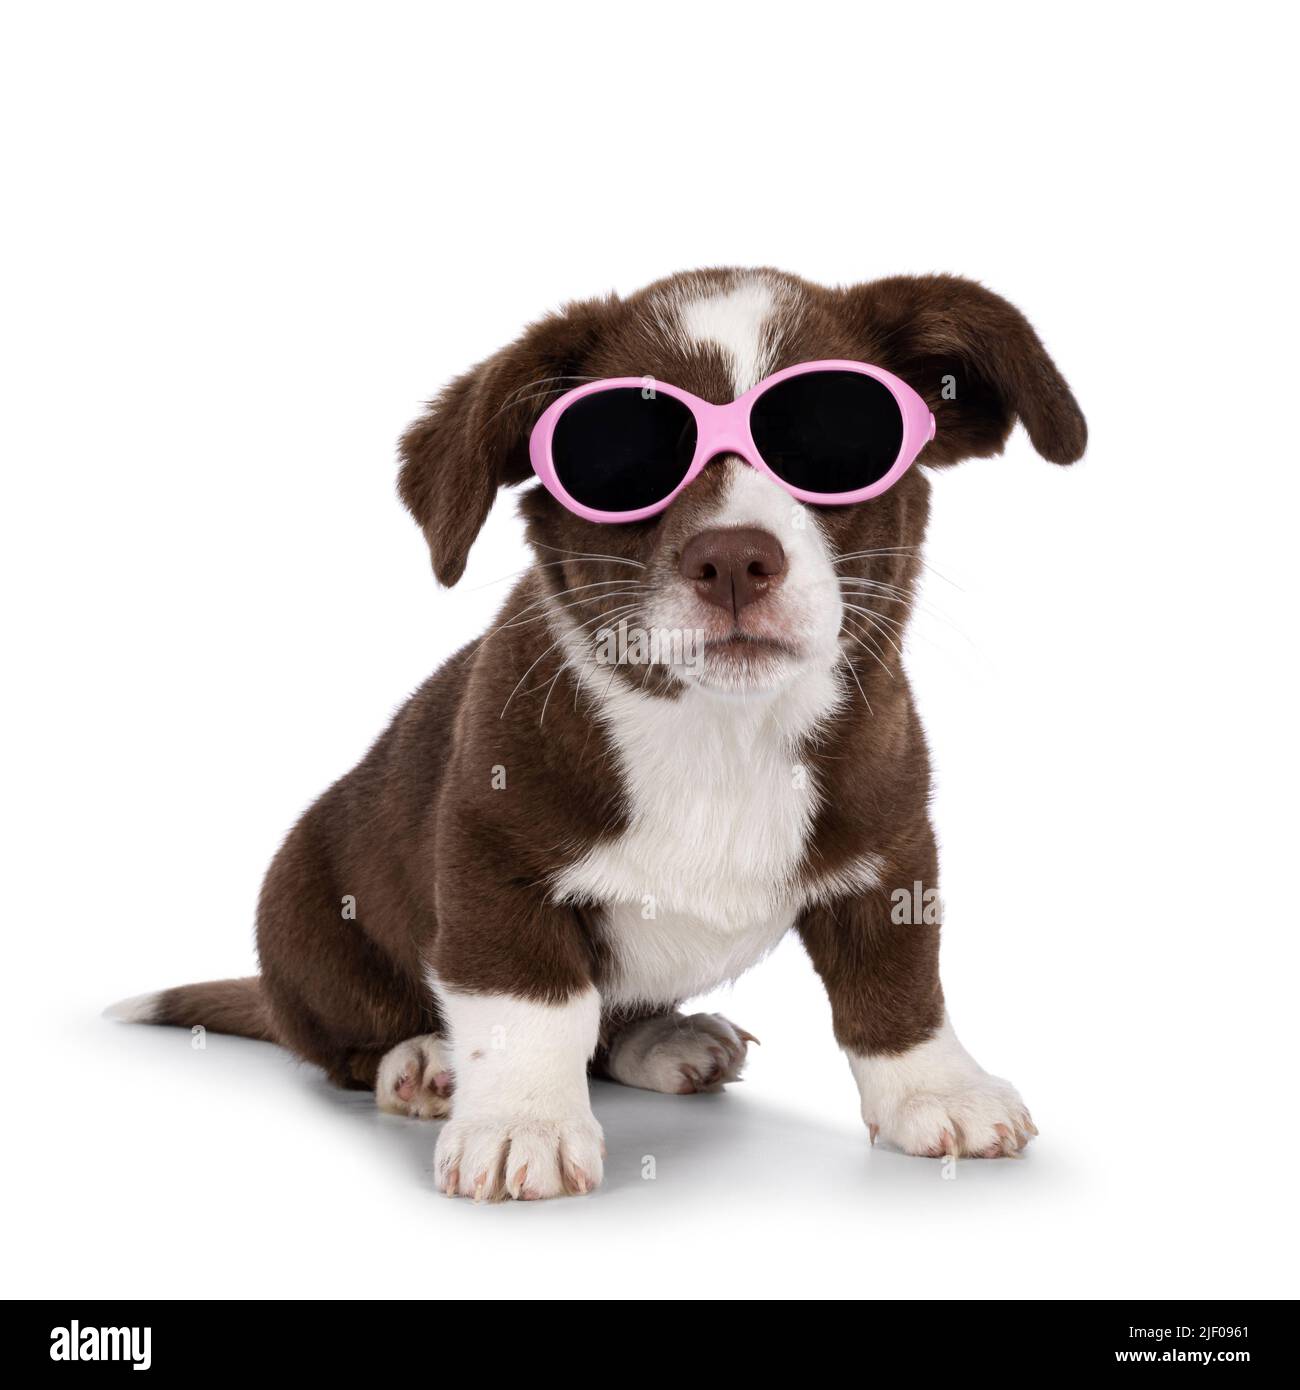 Cute brown with white Welsh Corgi Cardigan dog pup, sitting up wearing pink sun glasses. Looking towards camera. Isolated on a white background. Stock Photo